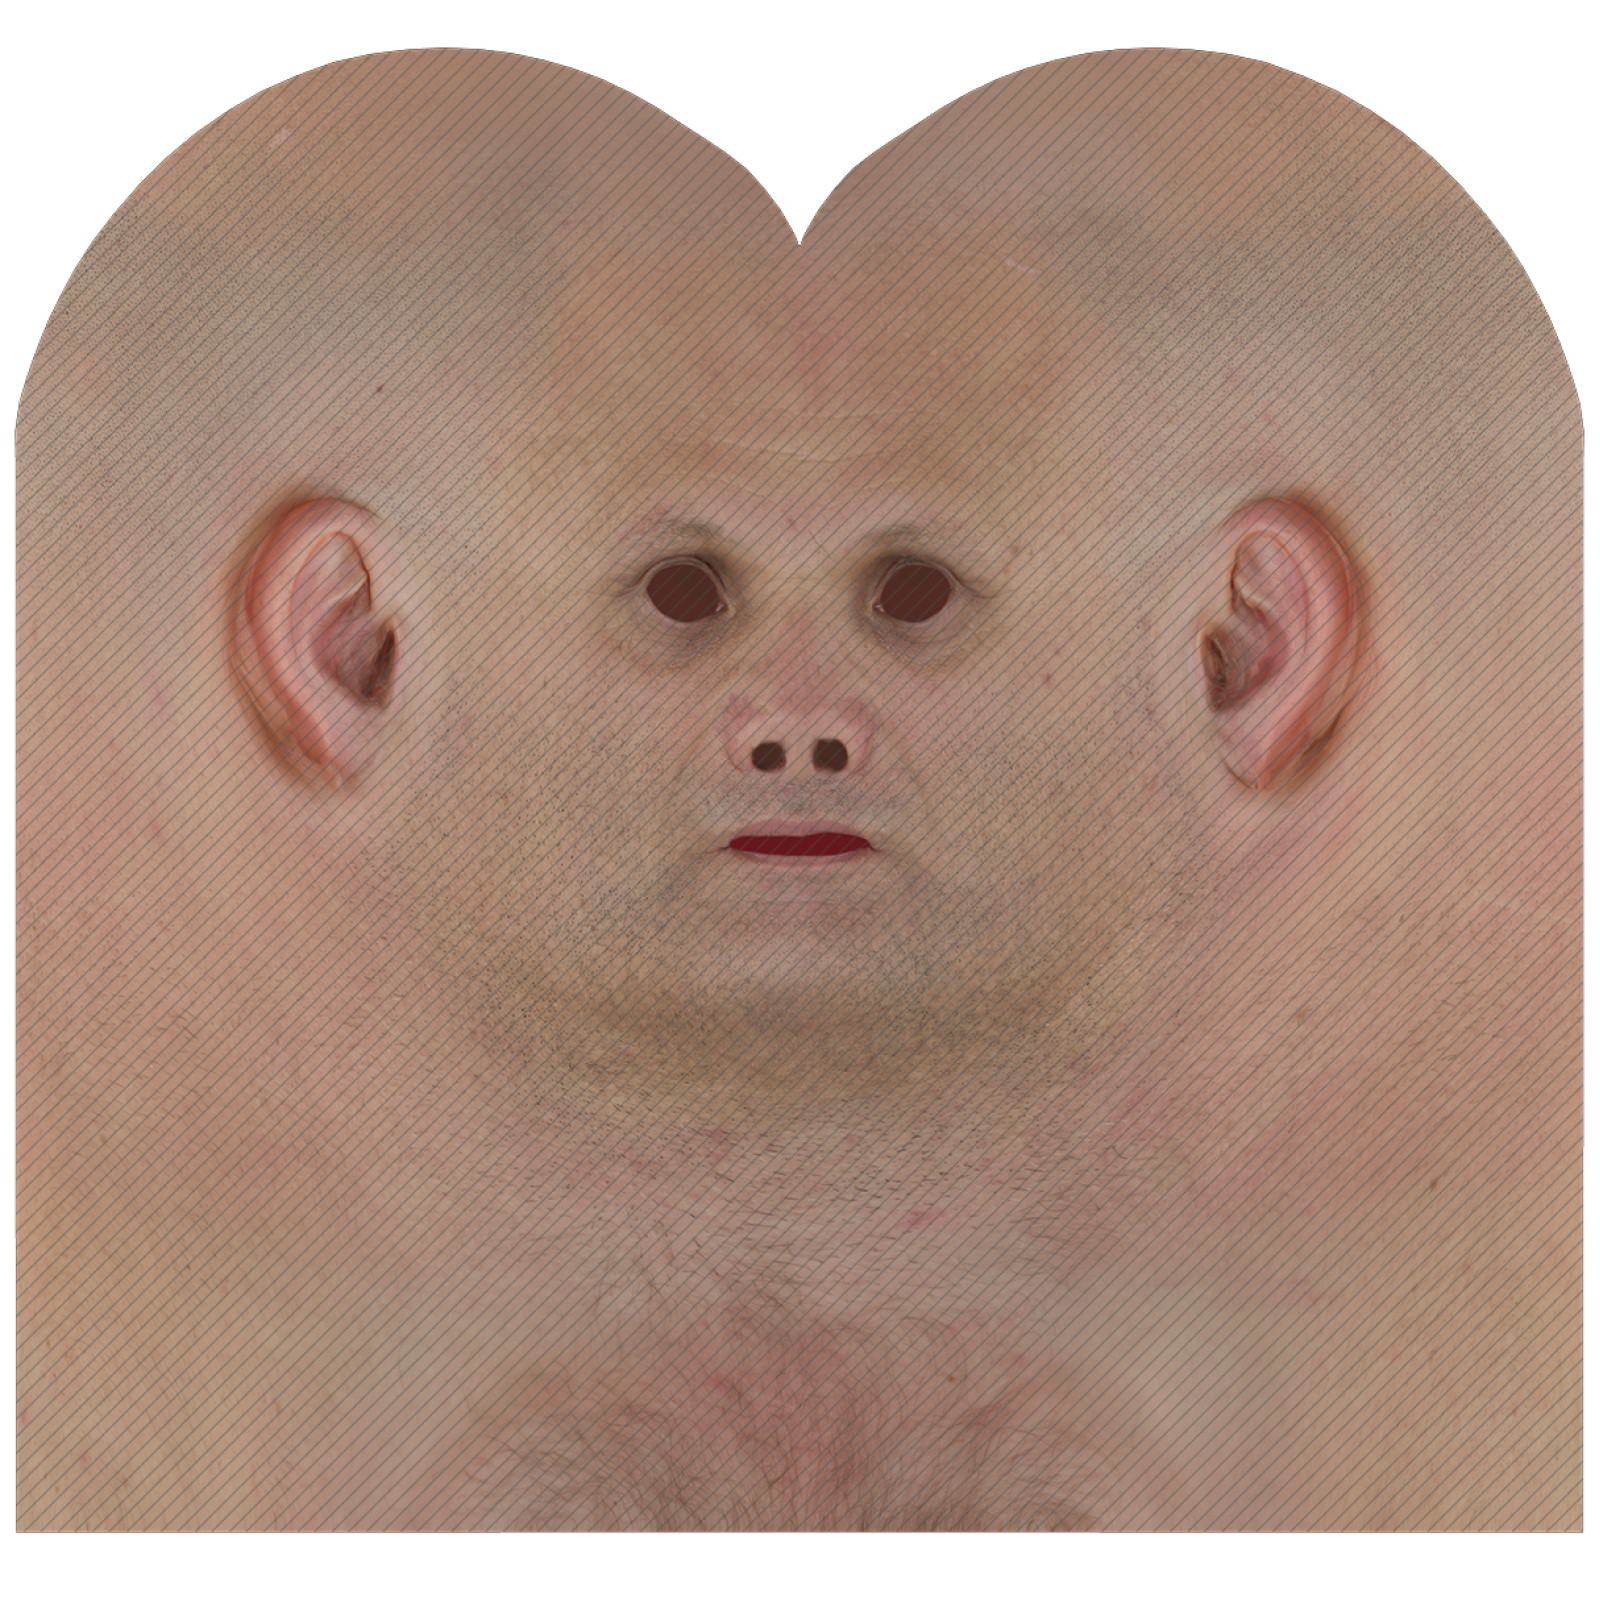 Male head texture map 22